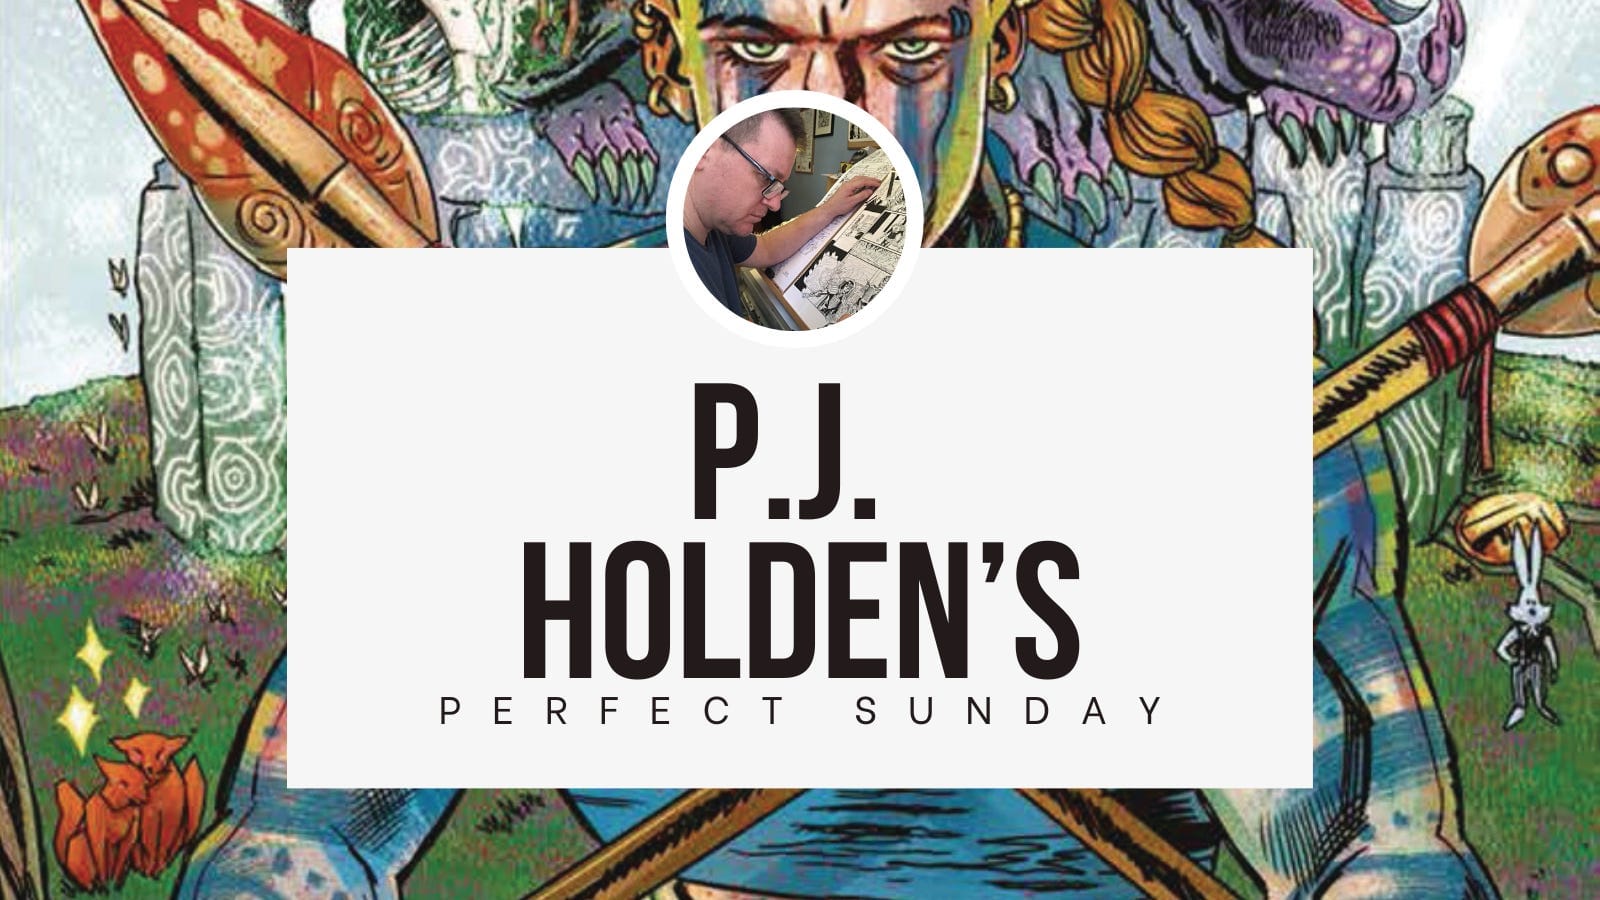 A perfect Sunday with... P.J. Holden